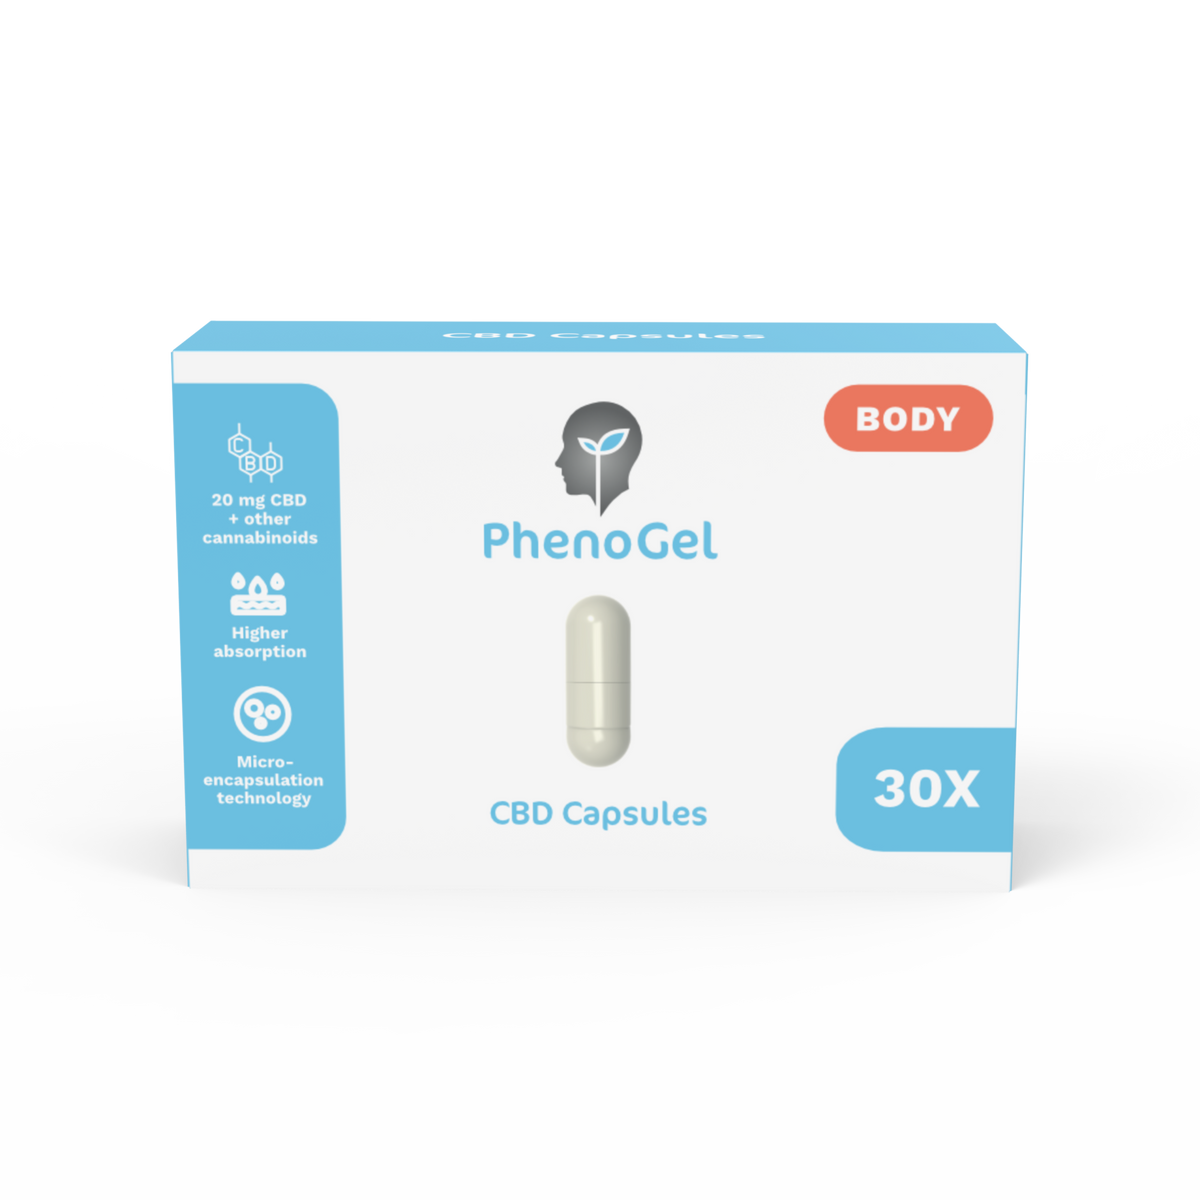 Phenogel CBD Capsules for Natural Well-being